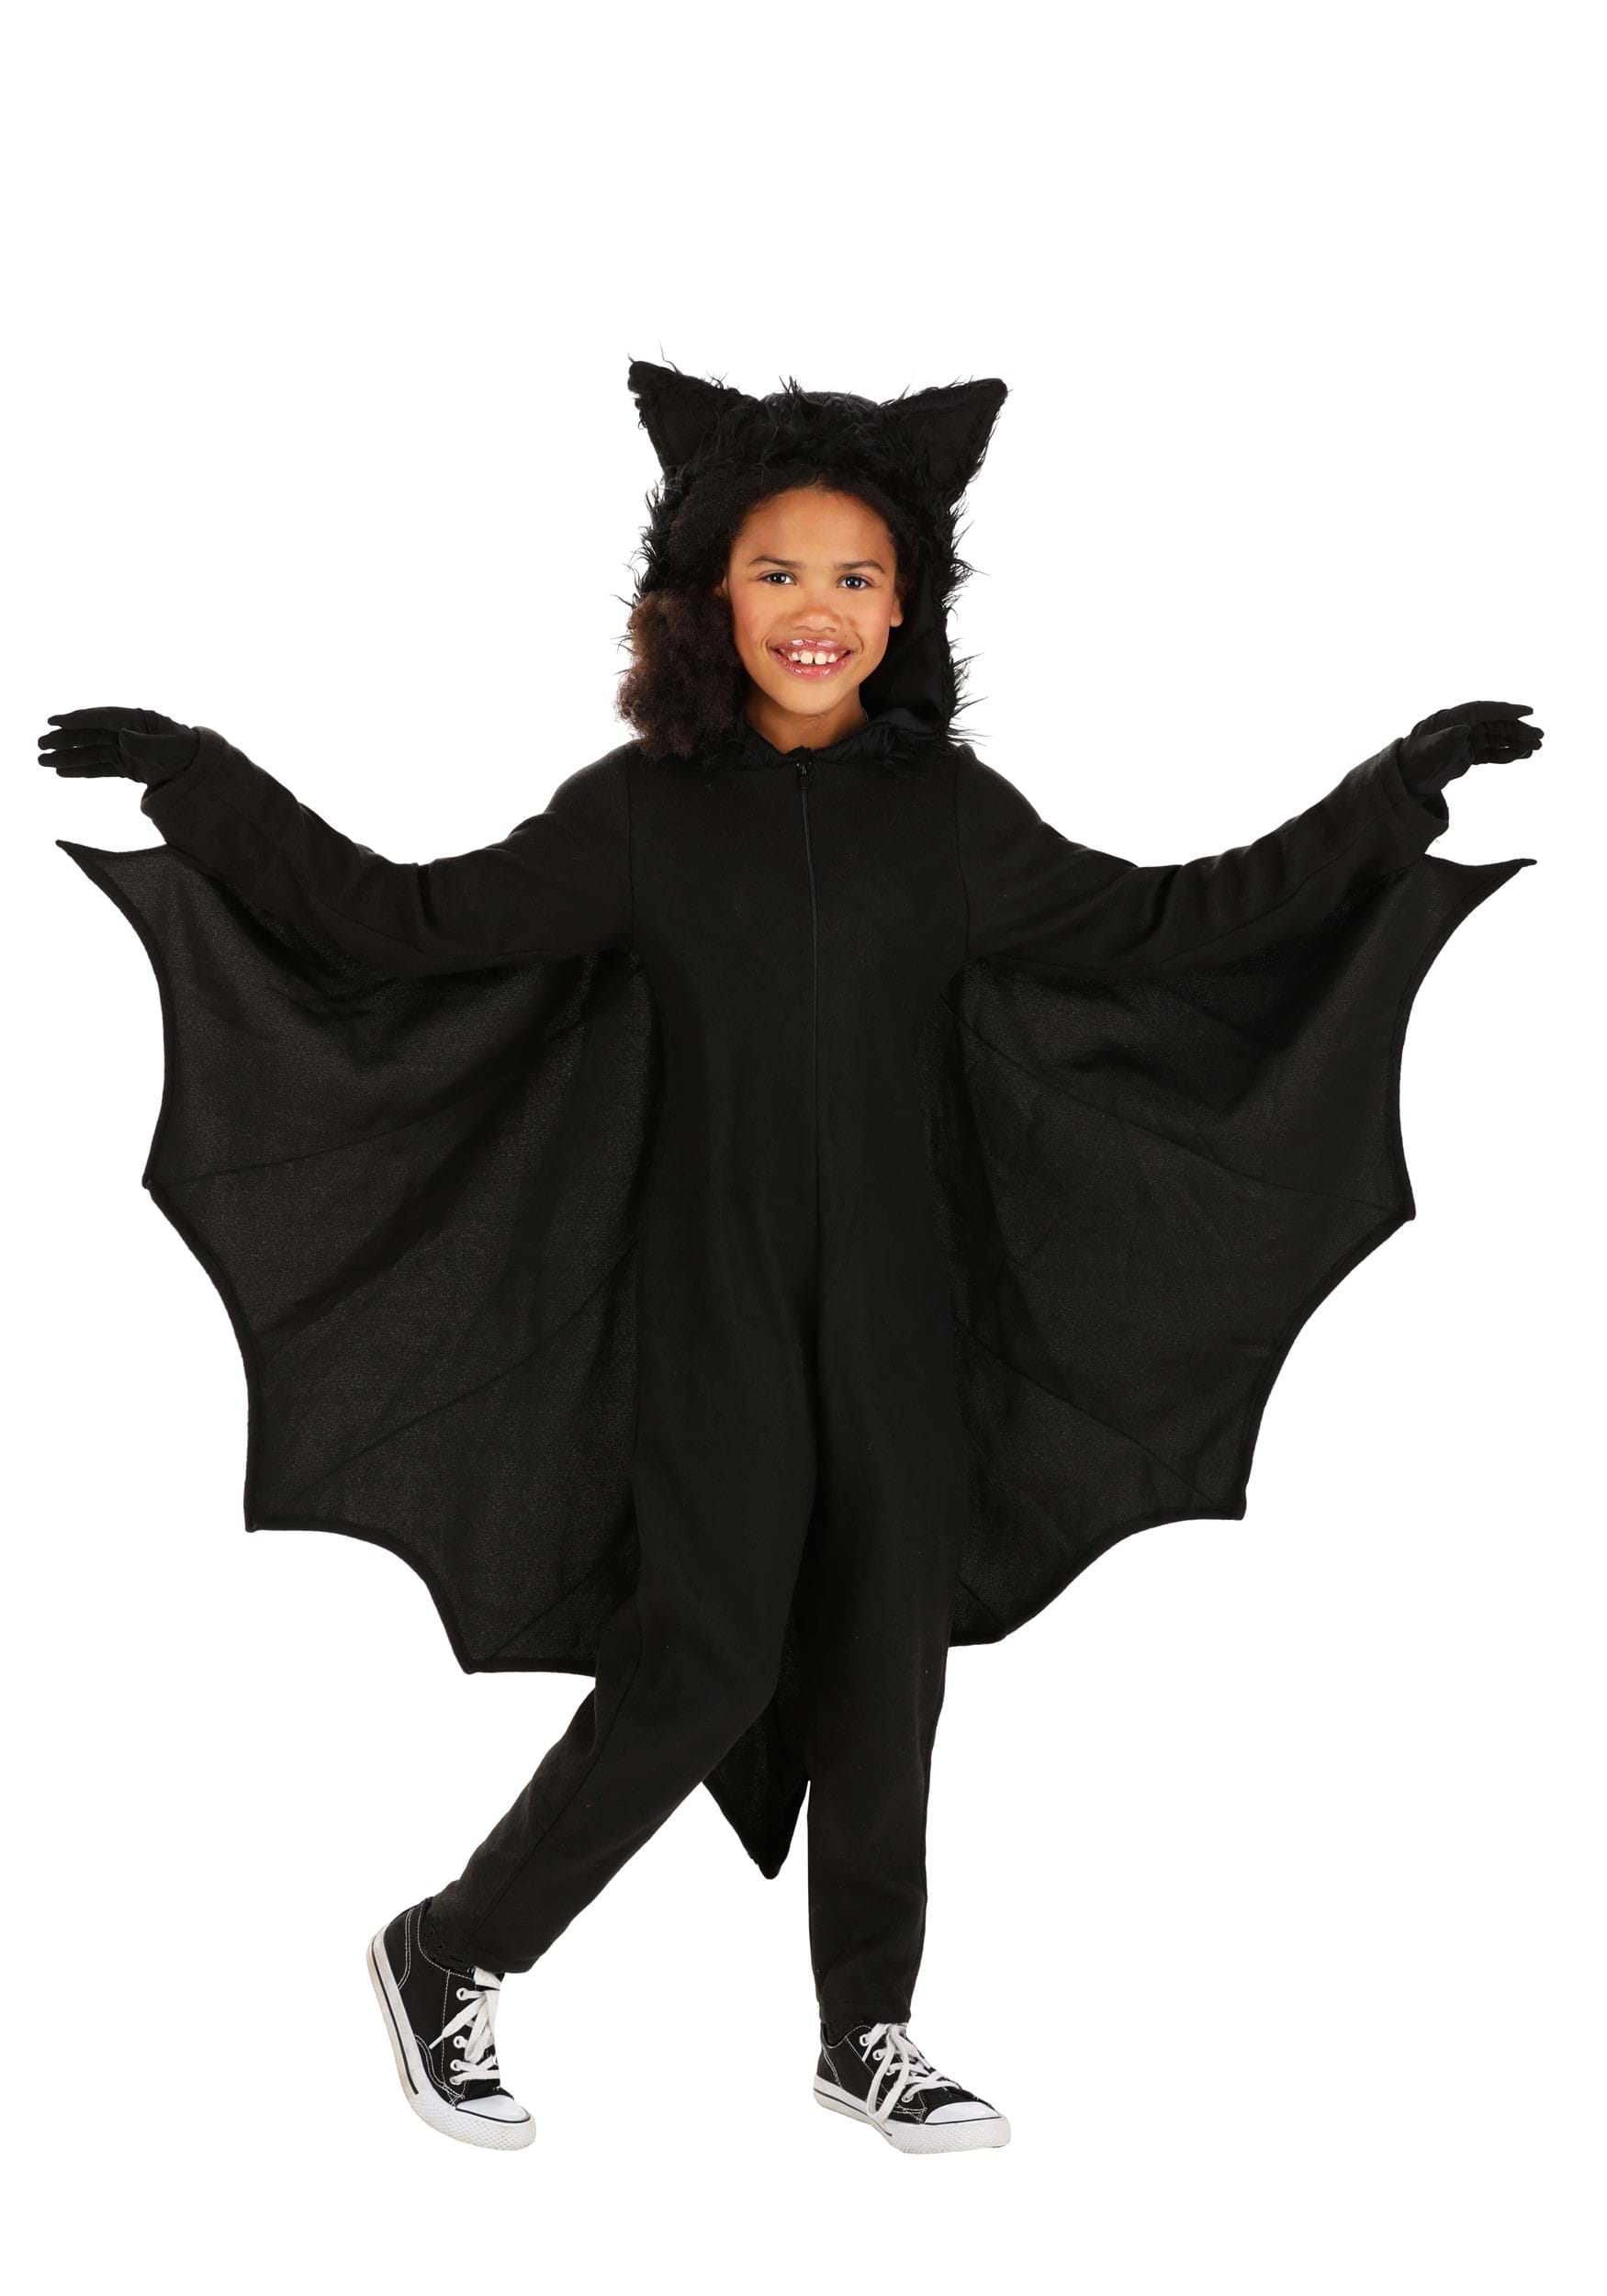 Bat Cosplay Costume for Adult, Dark Knight Superhero Jumpsuit Cloak Outfit  Mask for Halloween Party